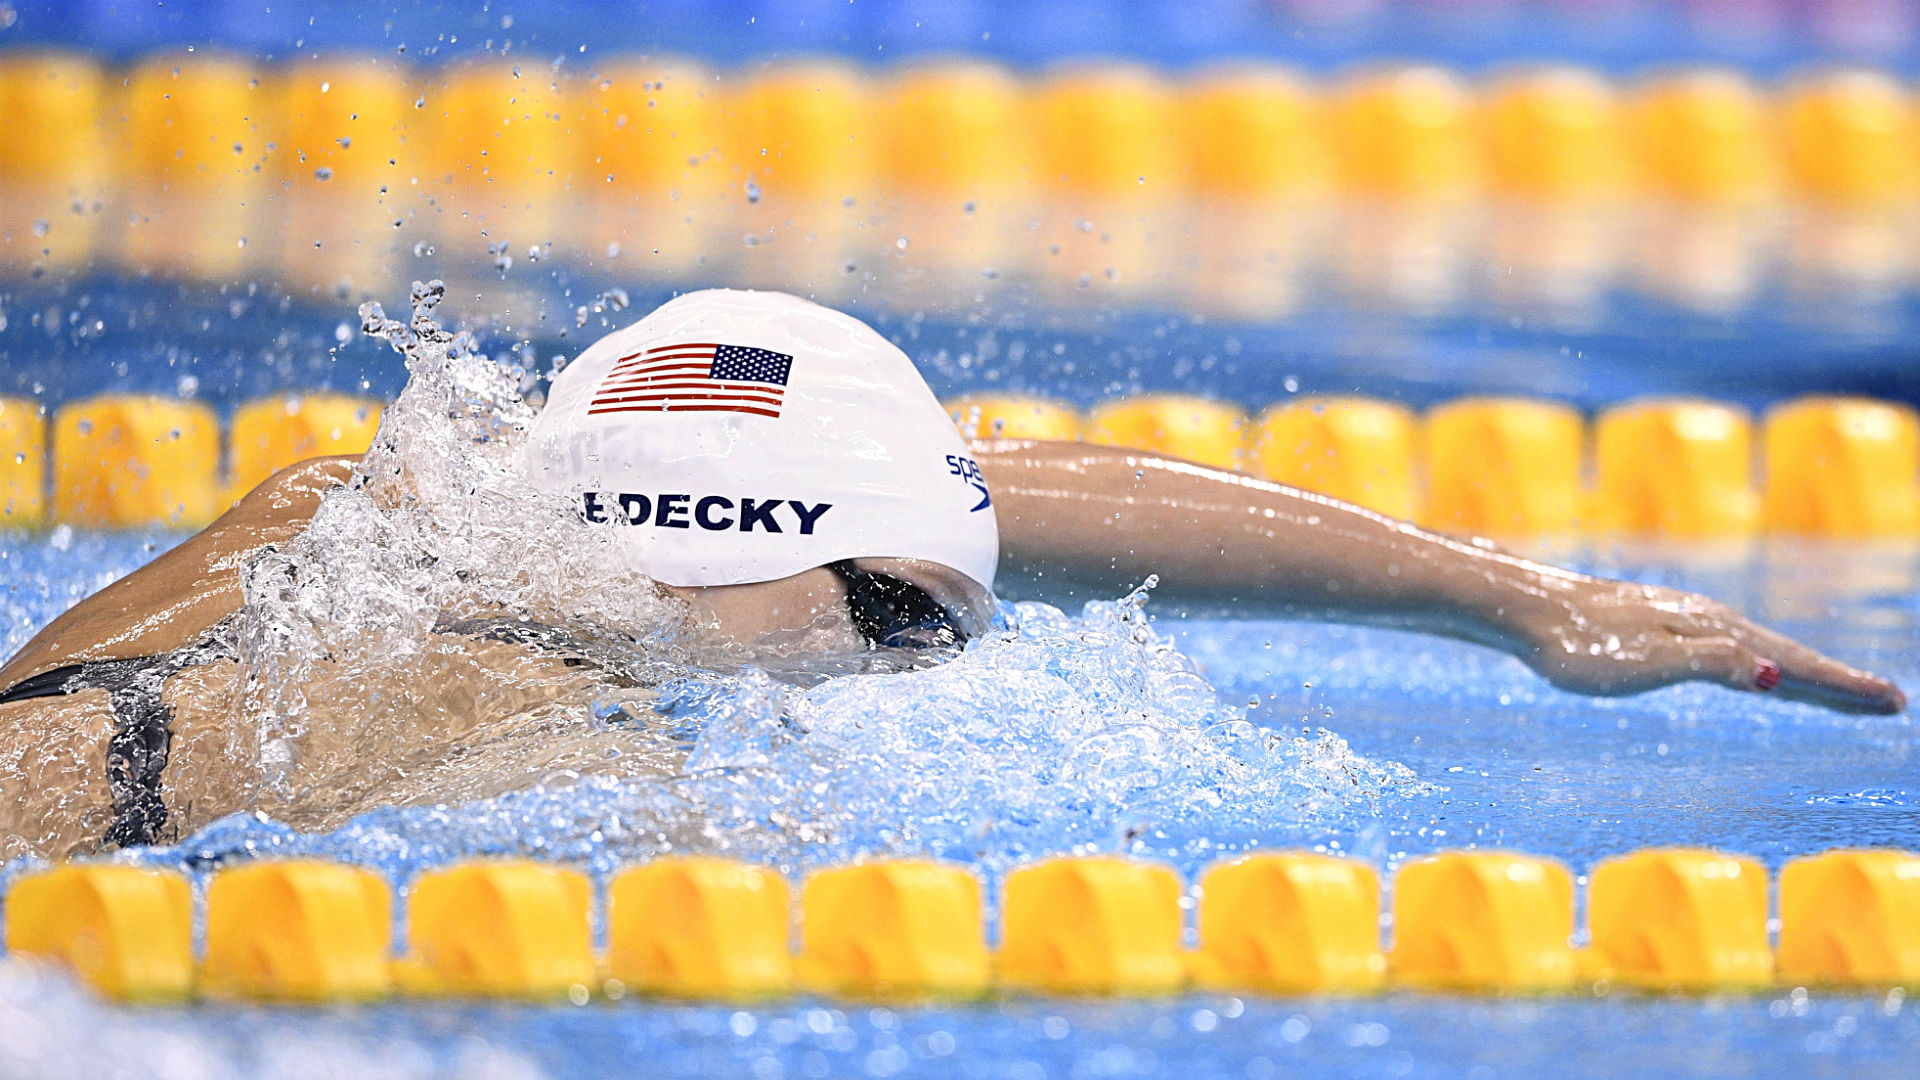 Ledecky just racing herself in 400 free at Rio Olympics